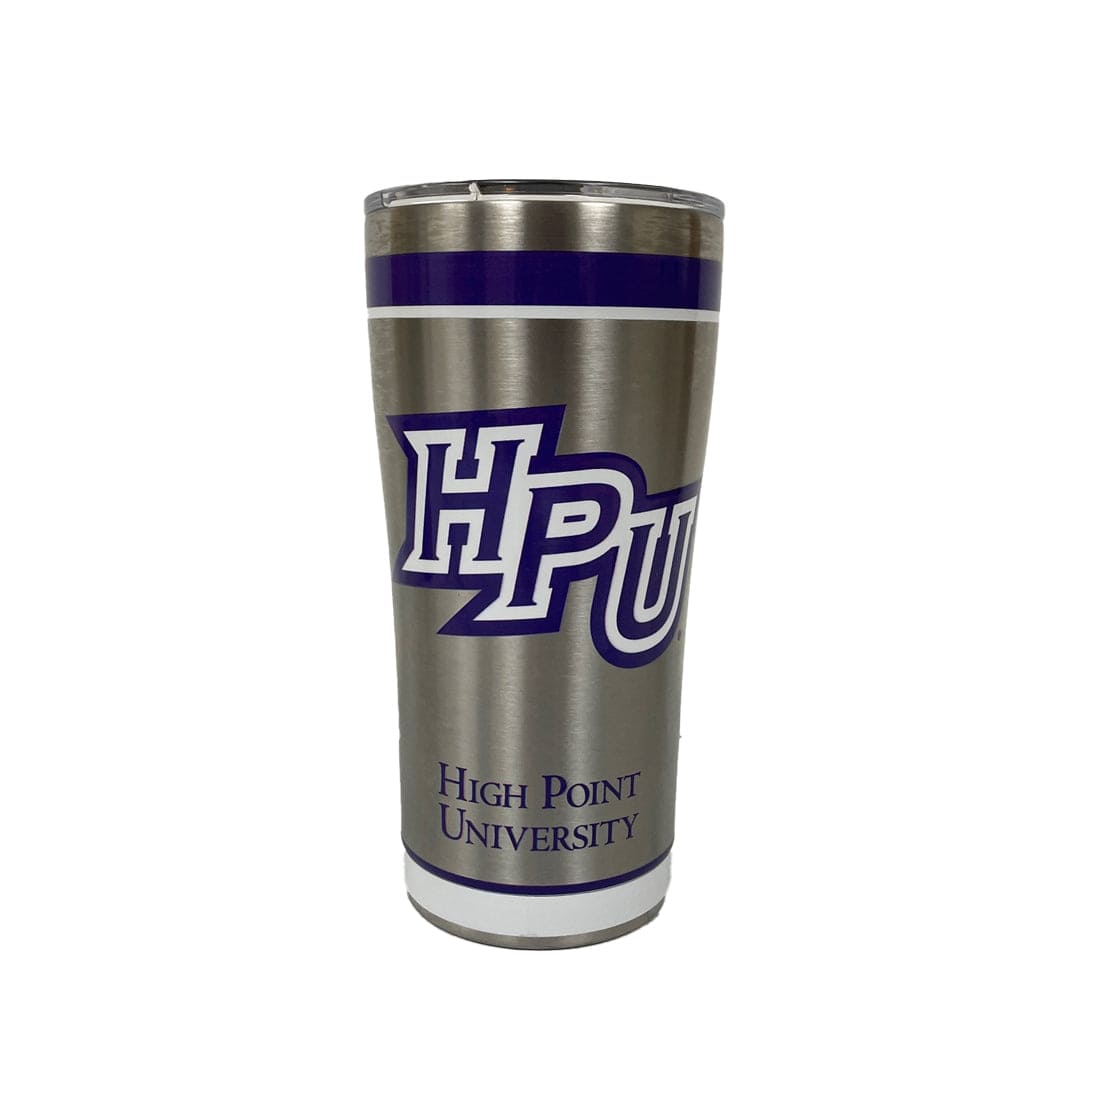 Tervis Tervis Stainless Steel 20 oz High Point University Tumbler with Slider Lid